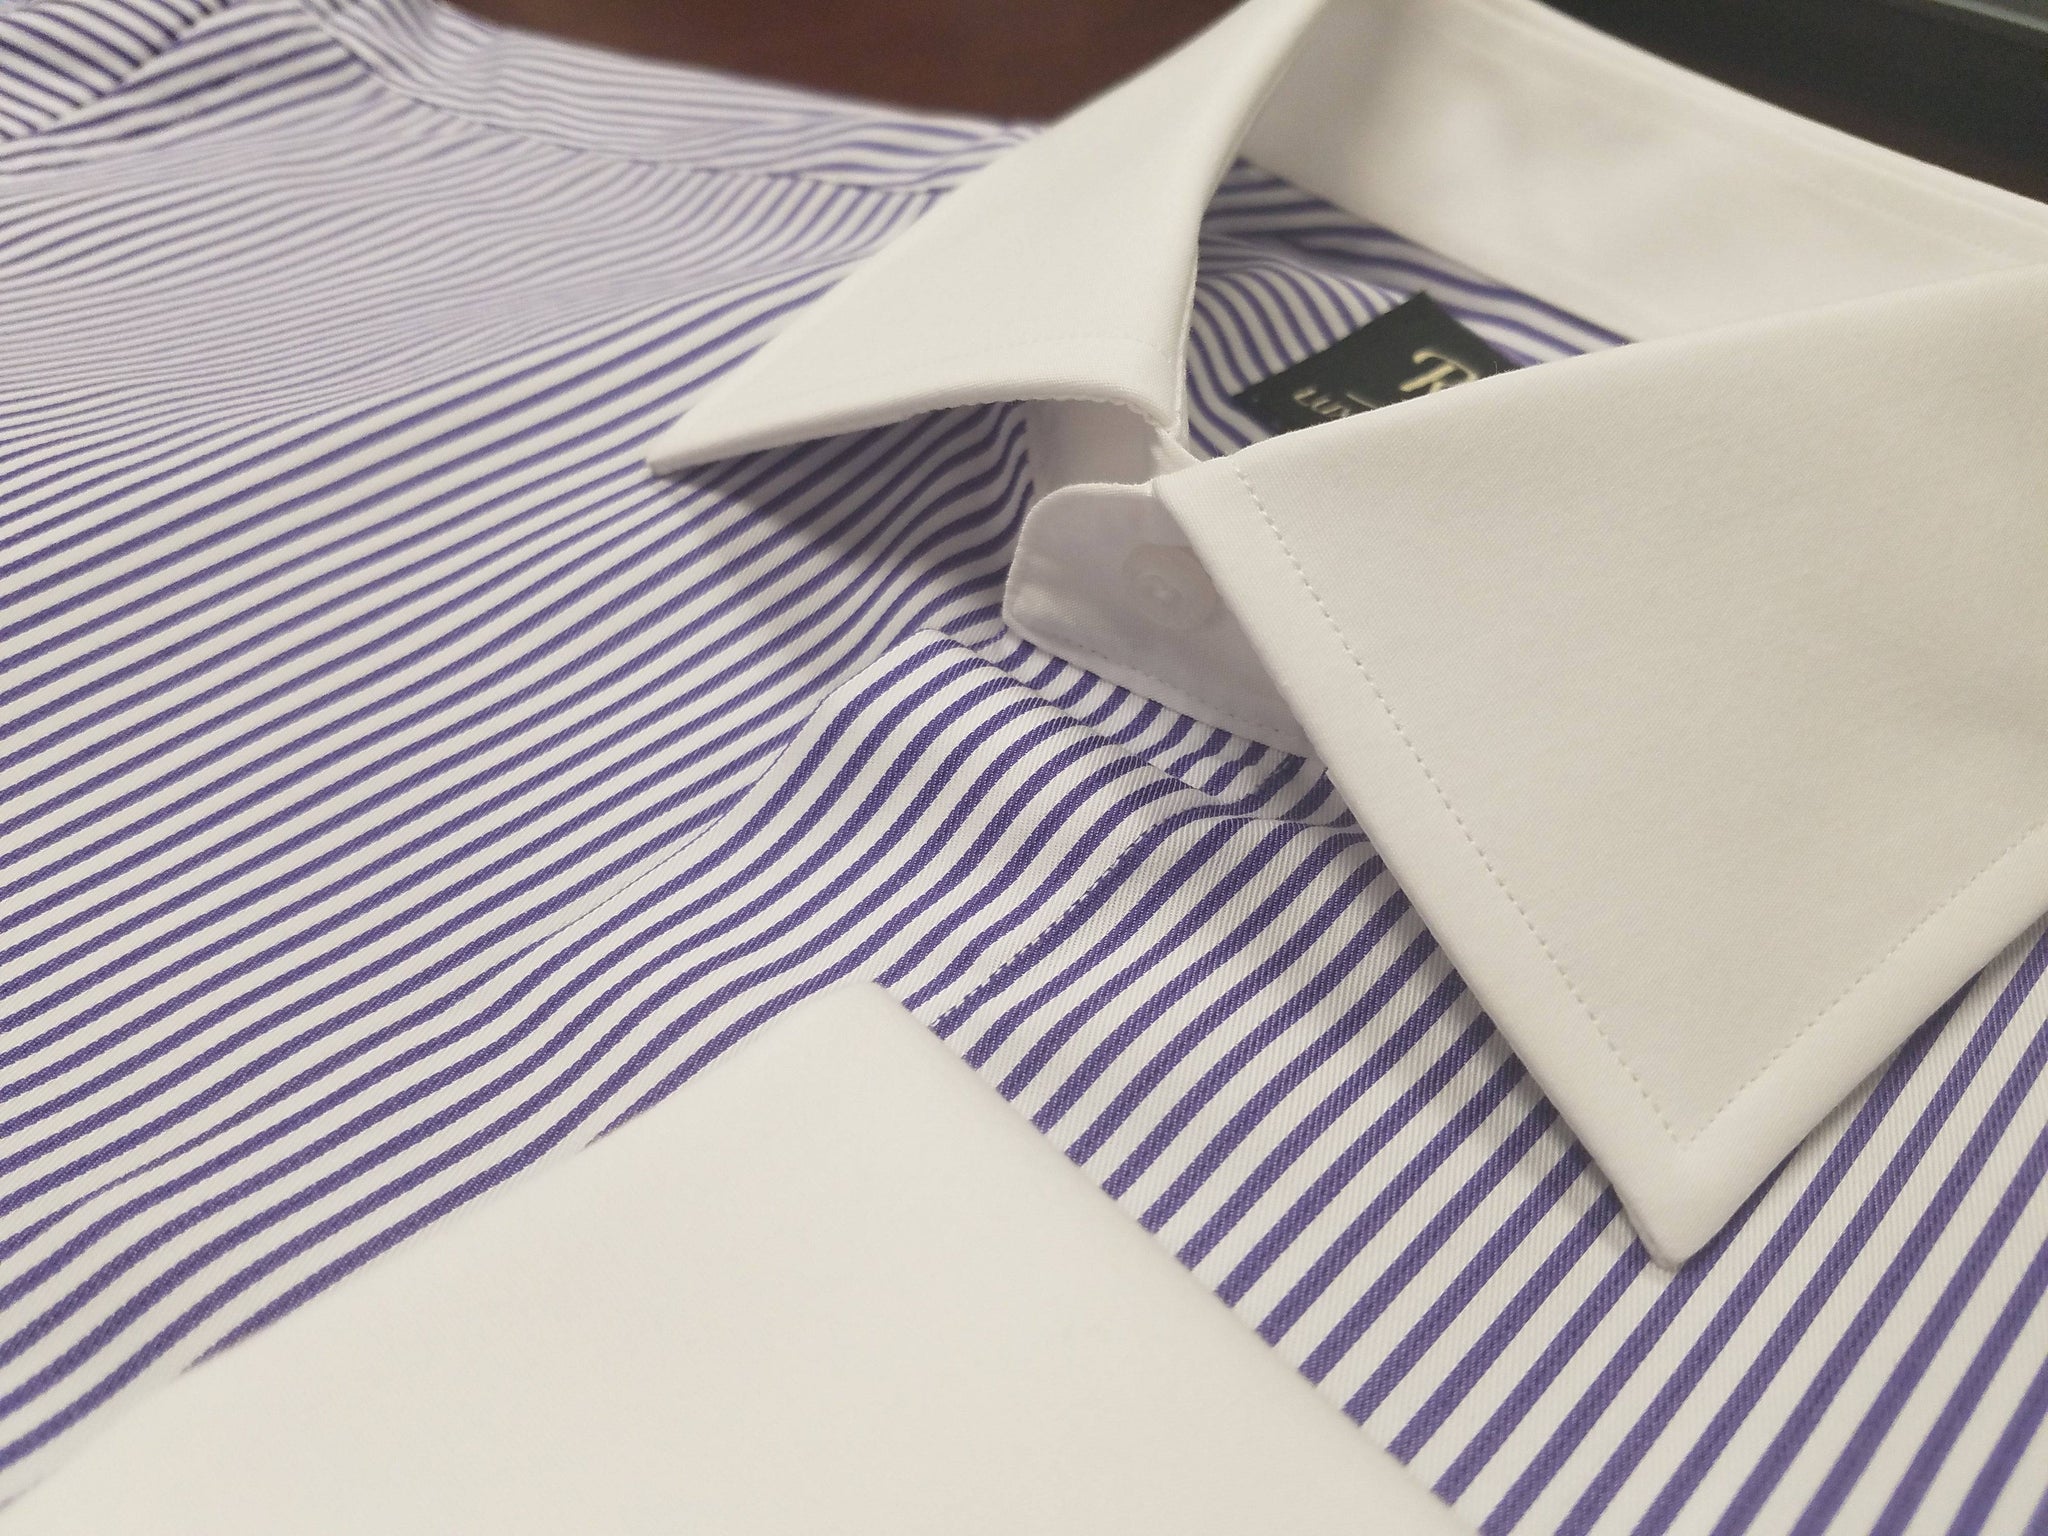 Rainwater's Luxury Collection Purple Stripe Dress Shirt with Contrast Collar and Cuffs - Rainwater's Men's Clothing and Tuxedo Rental